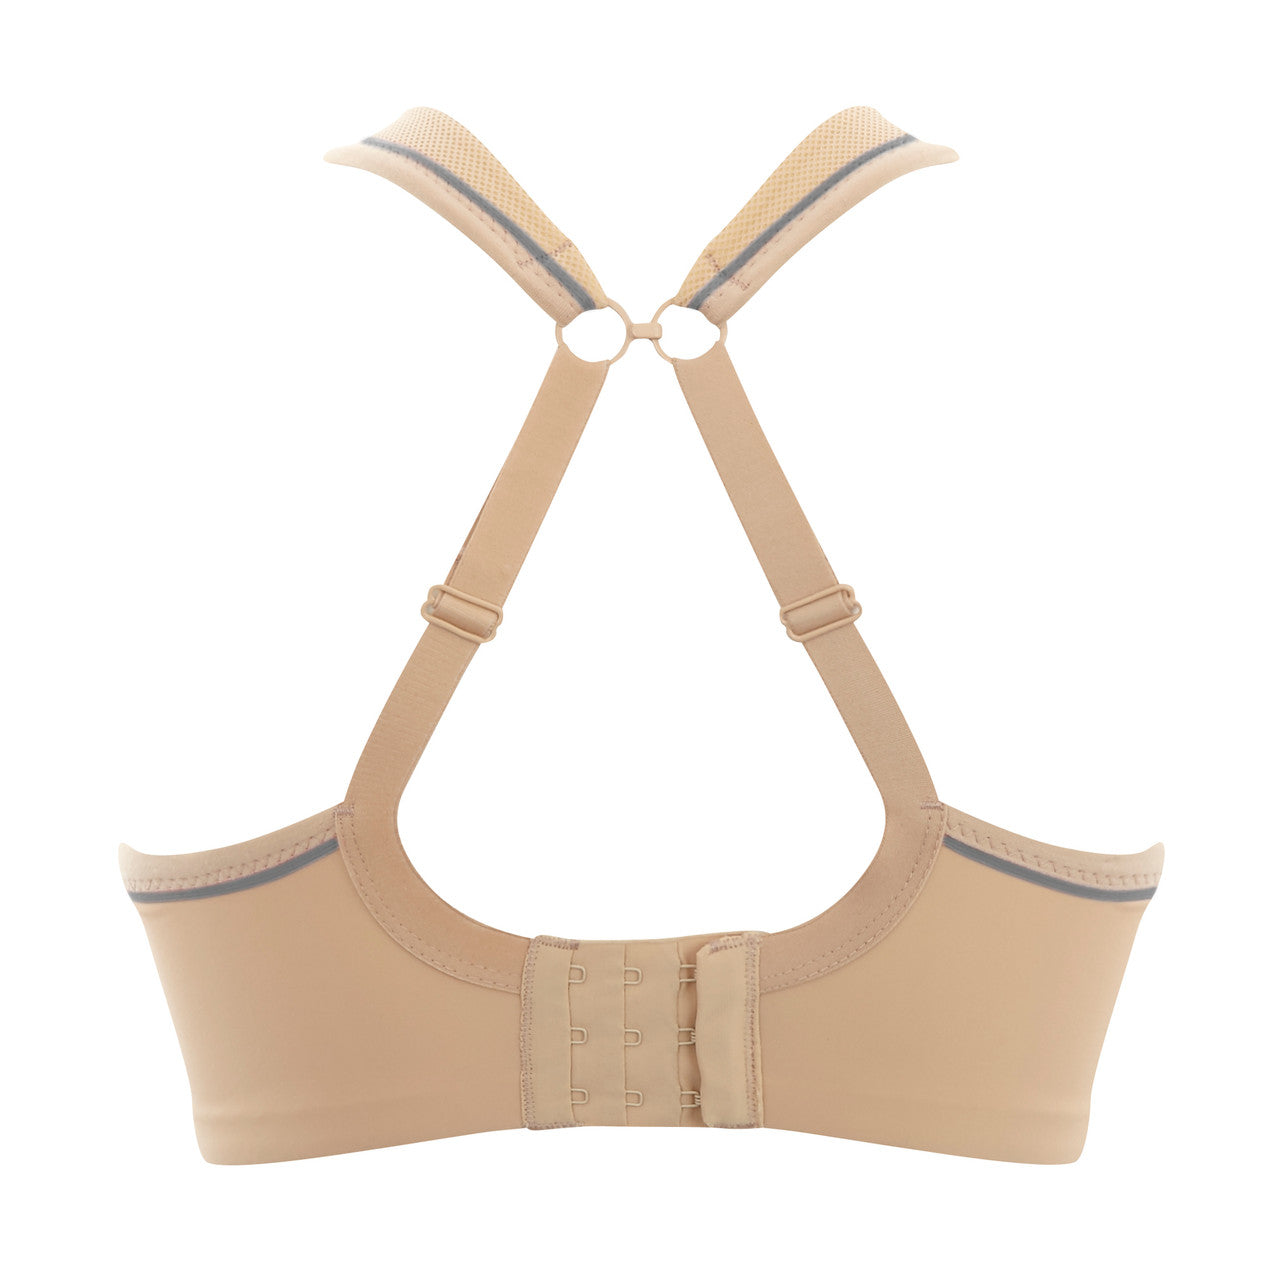 Panache Wired Sports Bra J-hooked shoulder strap view of product photo.